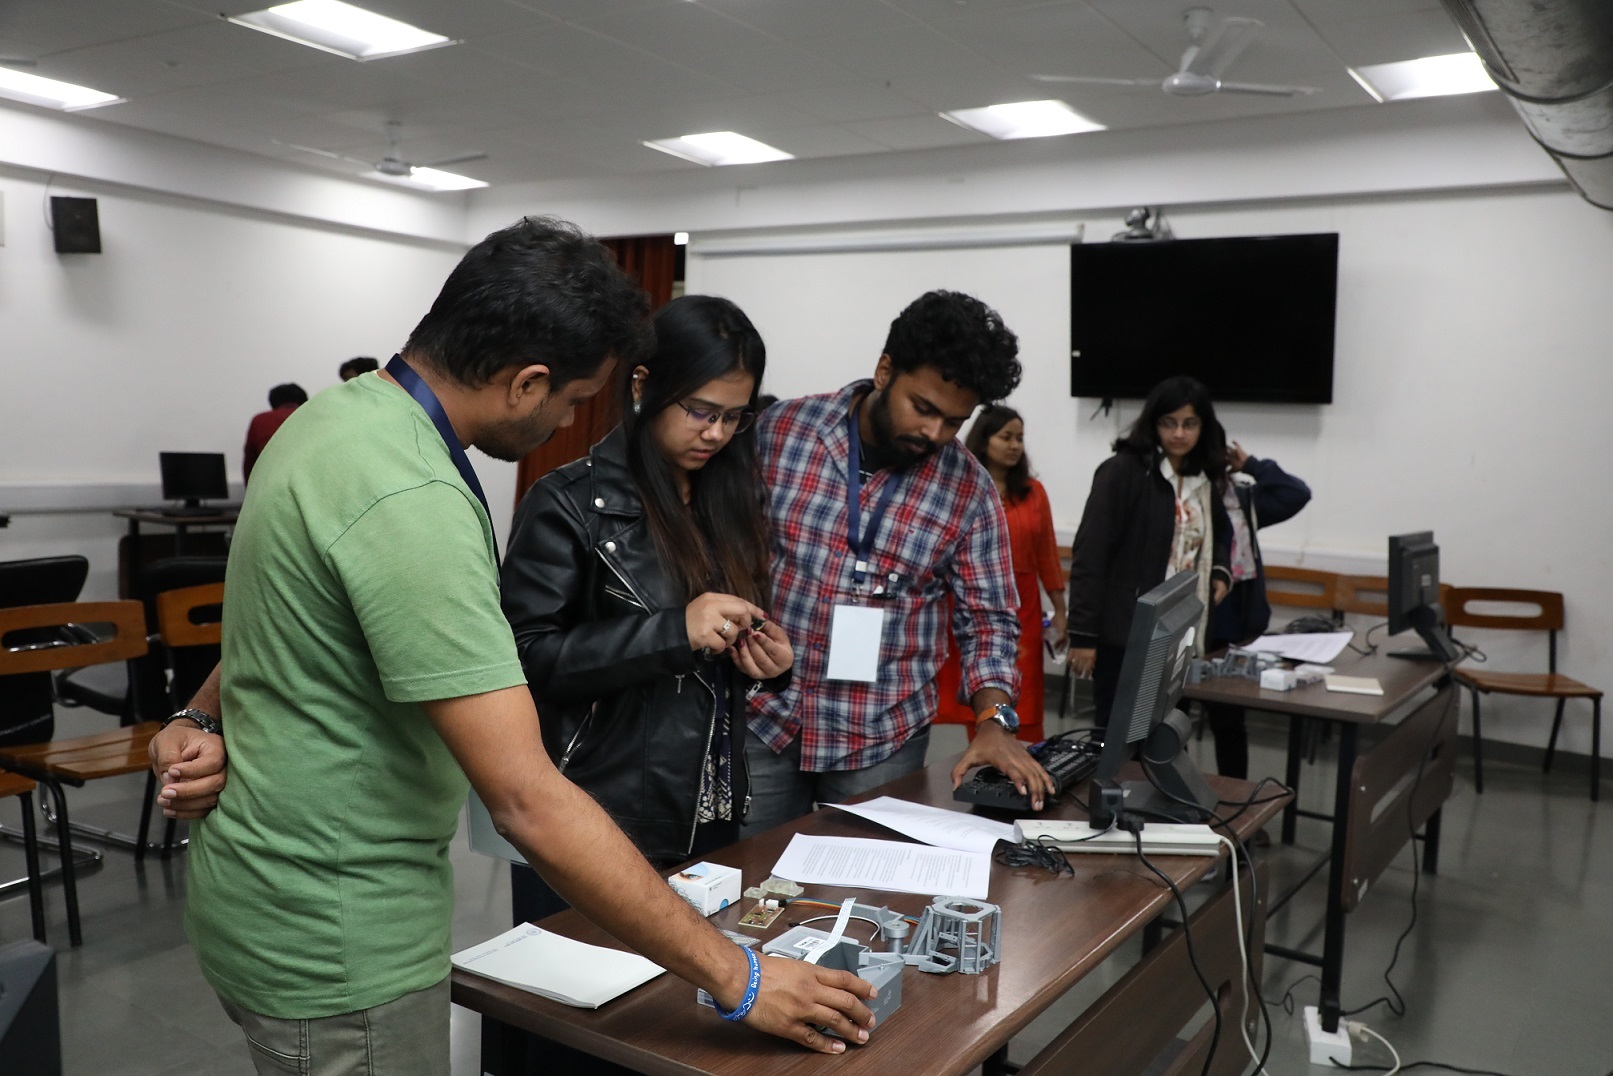 Participants during one of the hands-on session- 1